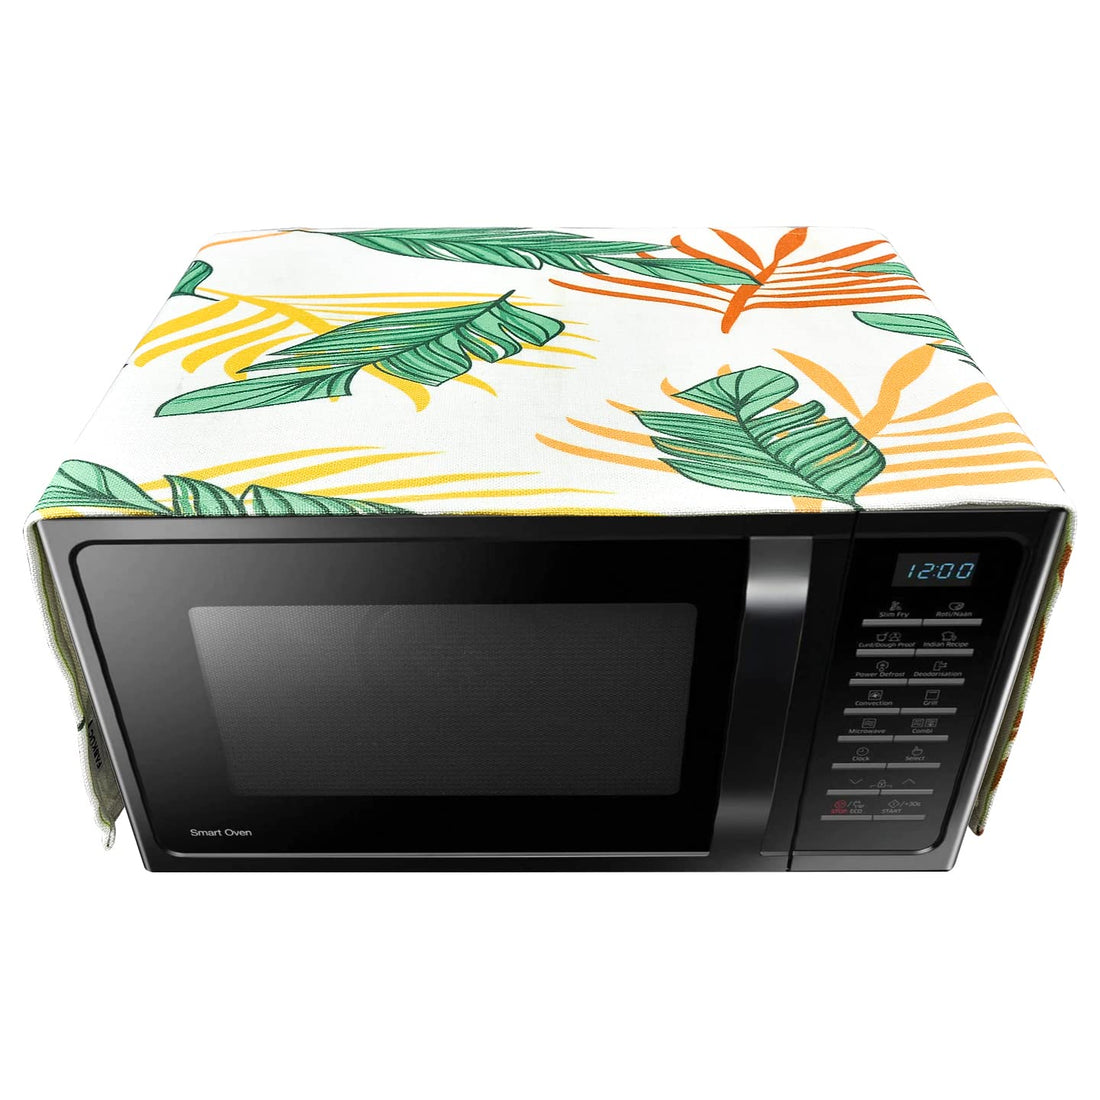 FABKUC Microwave/Oven Top Cotton Cover with 2 Utility Pockets, Splash-Proof, Dustproof Washer Dryer Cover (Monstera)